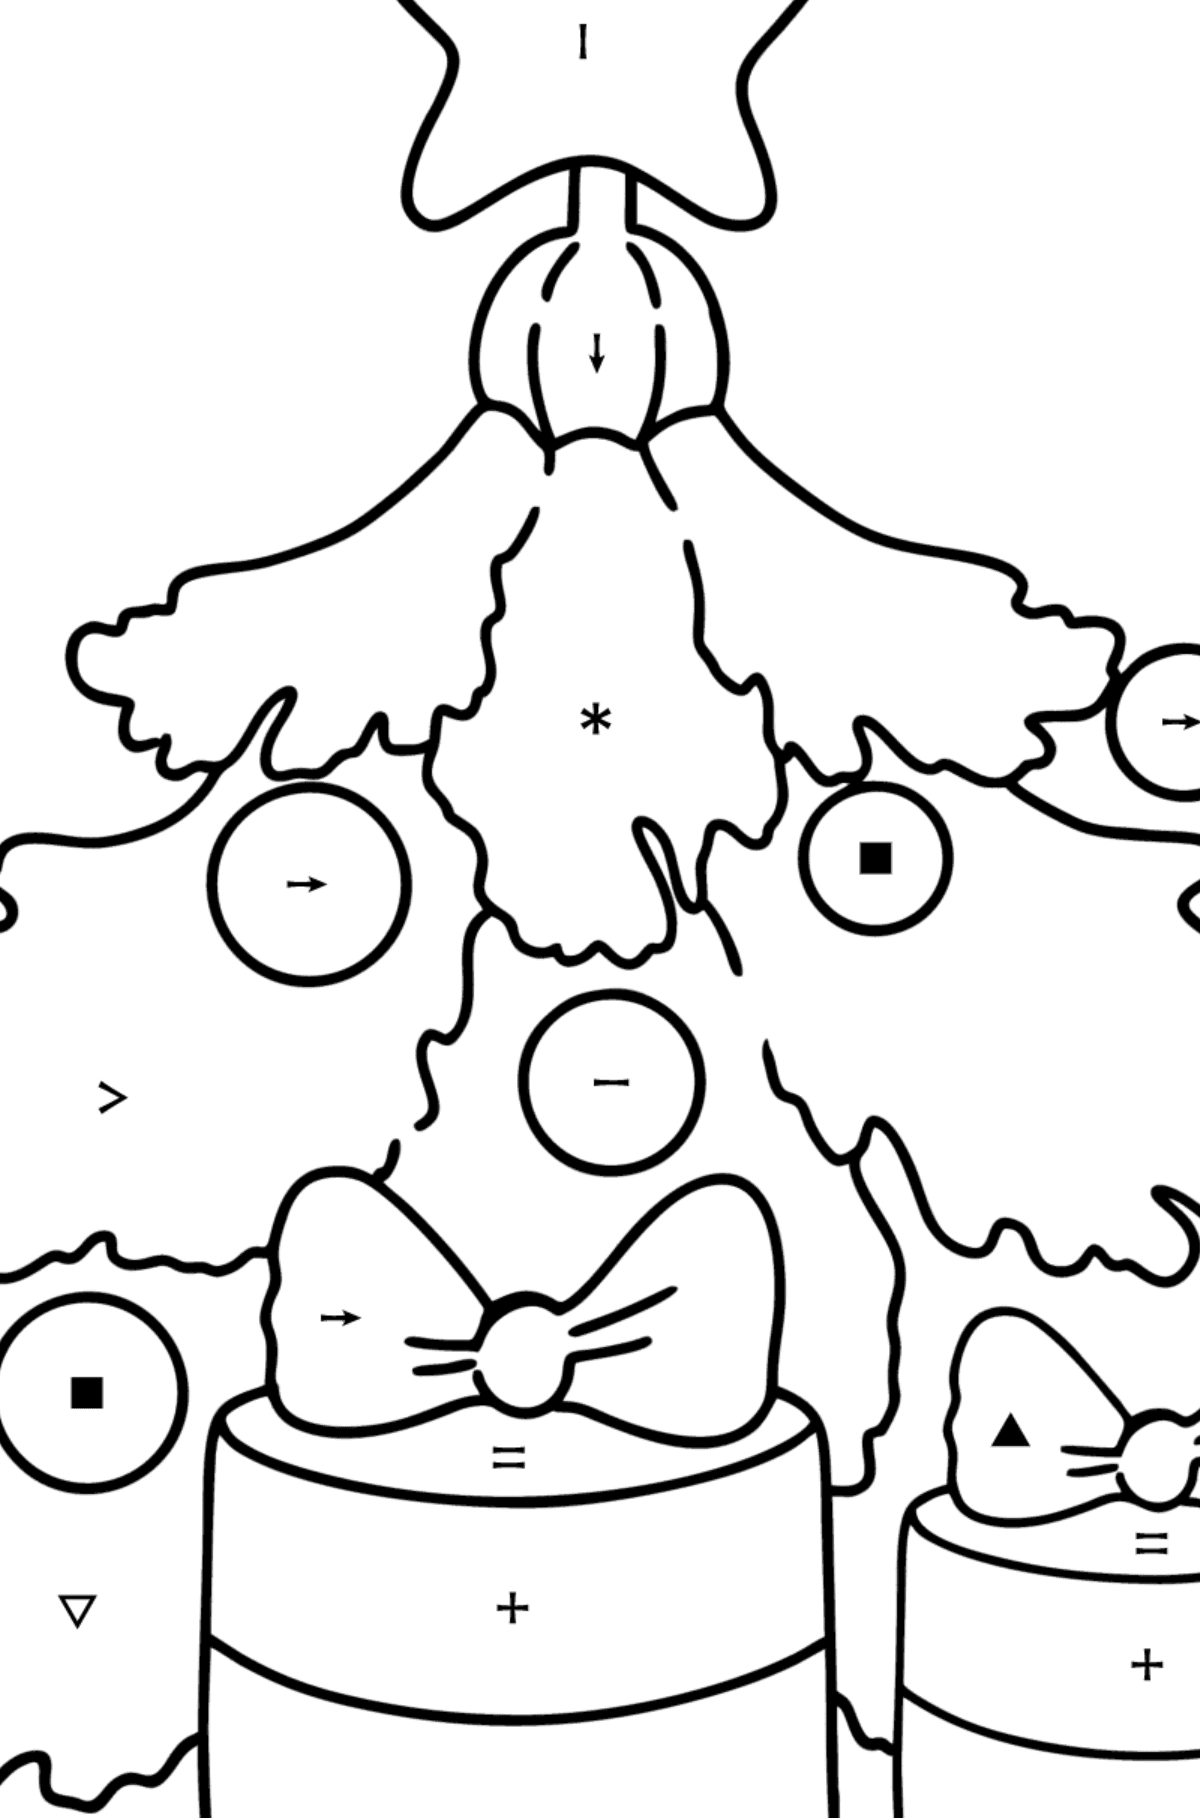 Christmas Tree and Gifts coloring page - Coloring by Symbols for Kids